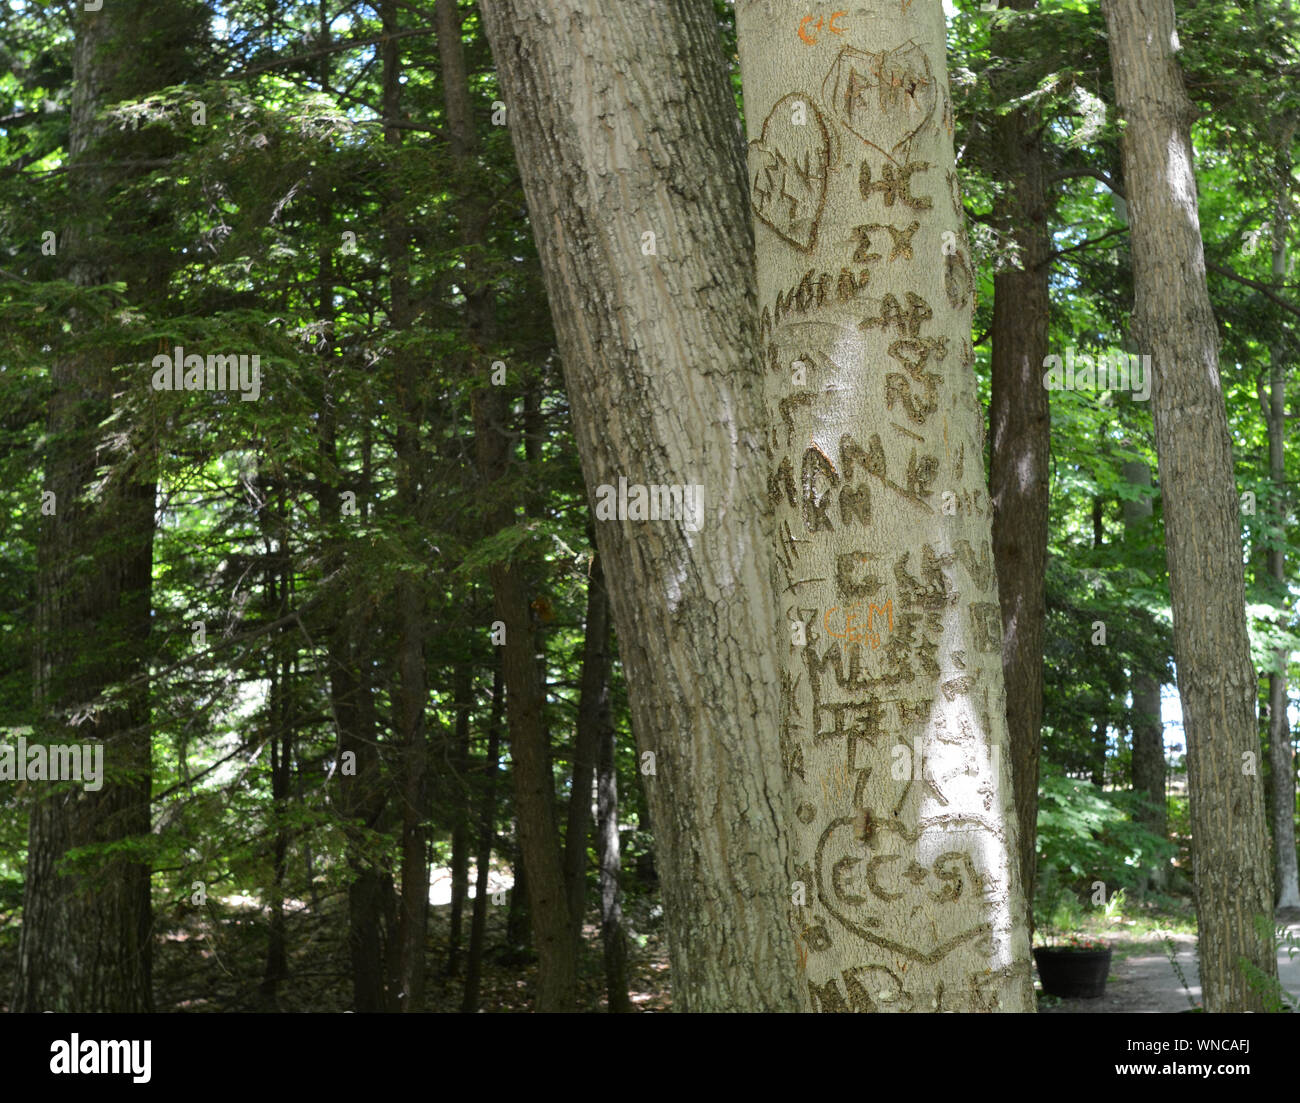 A tree in the forest that has been carved with many initials and names. Stock Photo